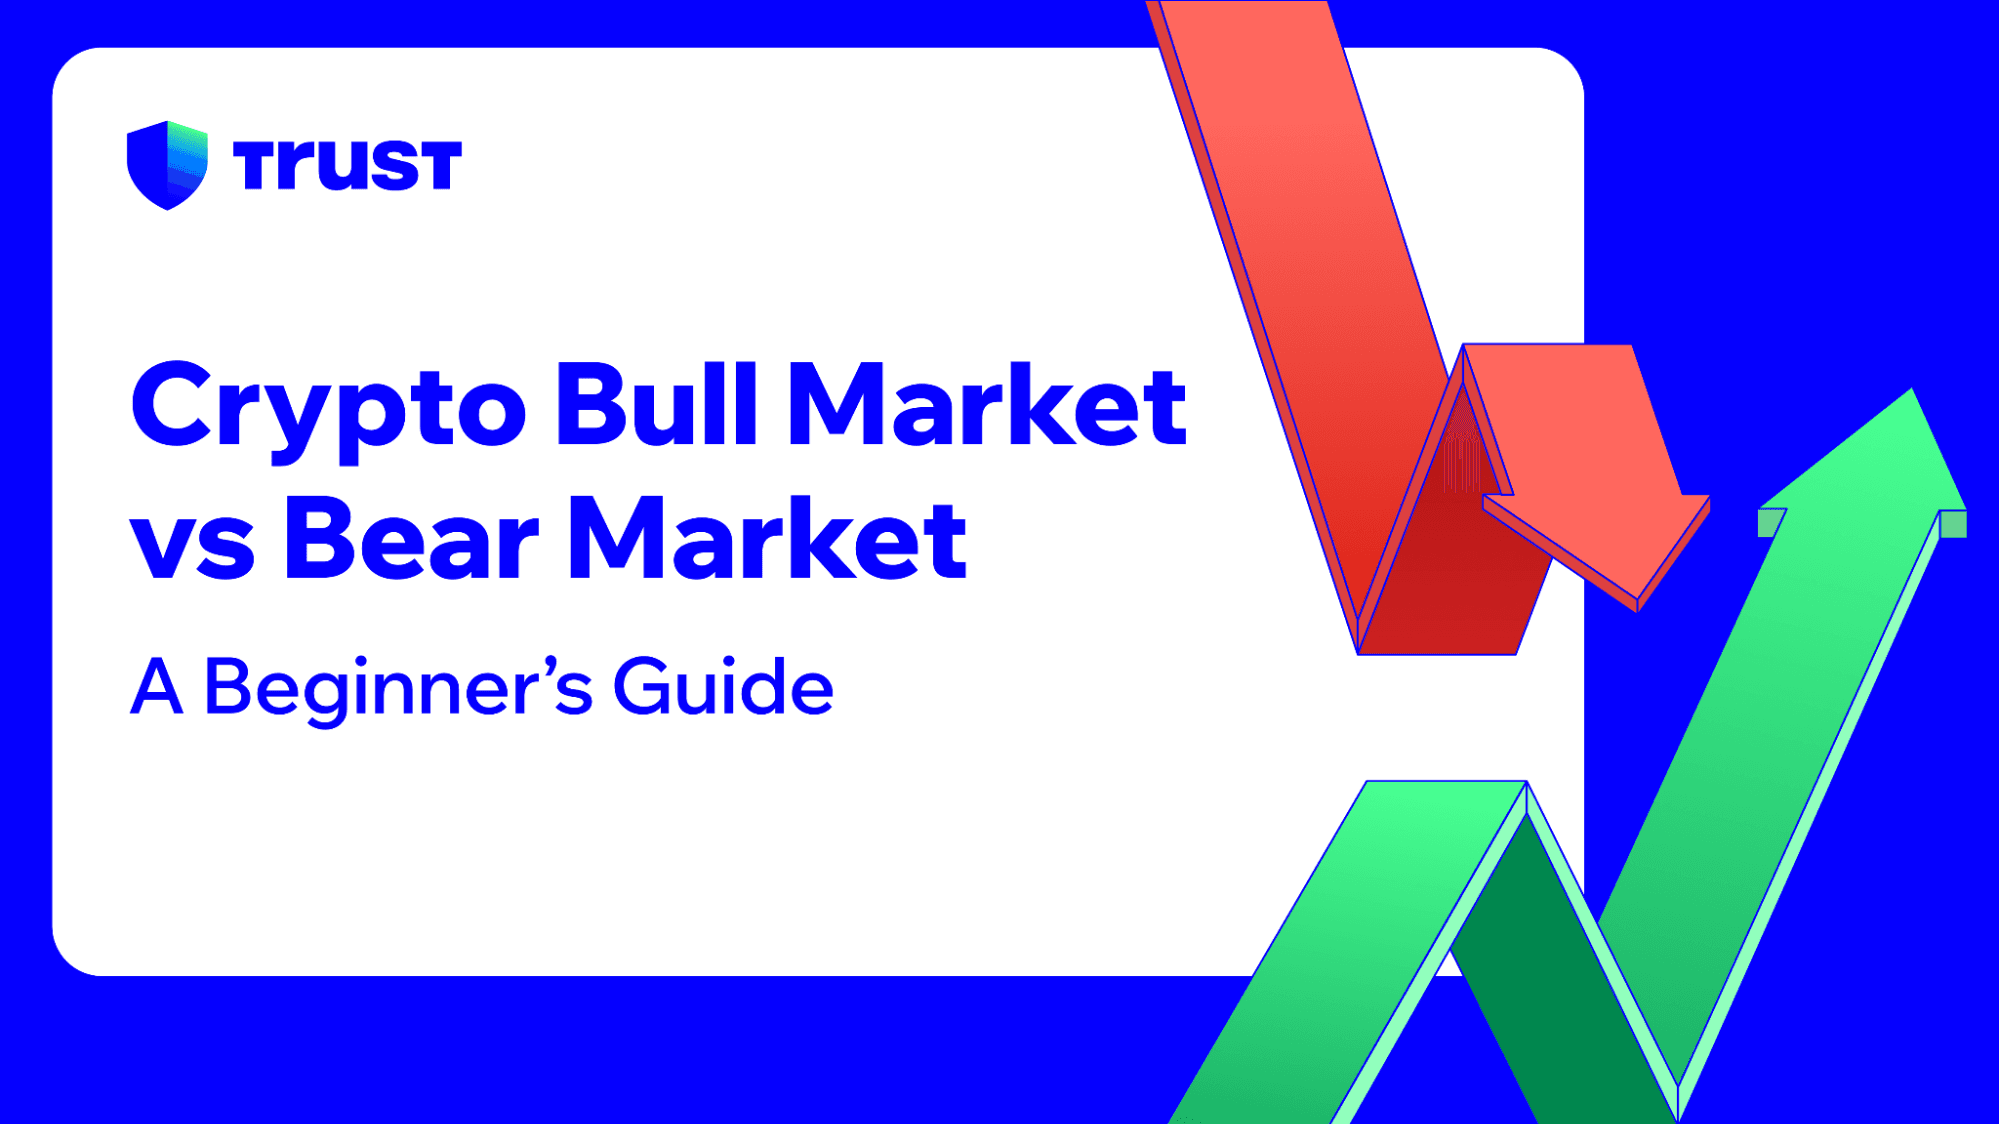 Bull Market Guide: The Different Phases & How To Invest During One